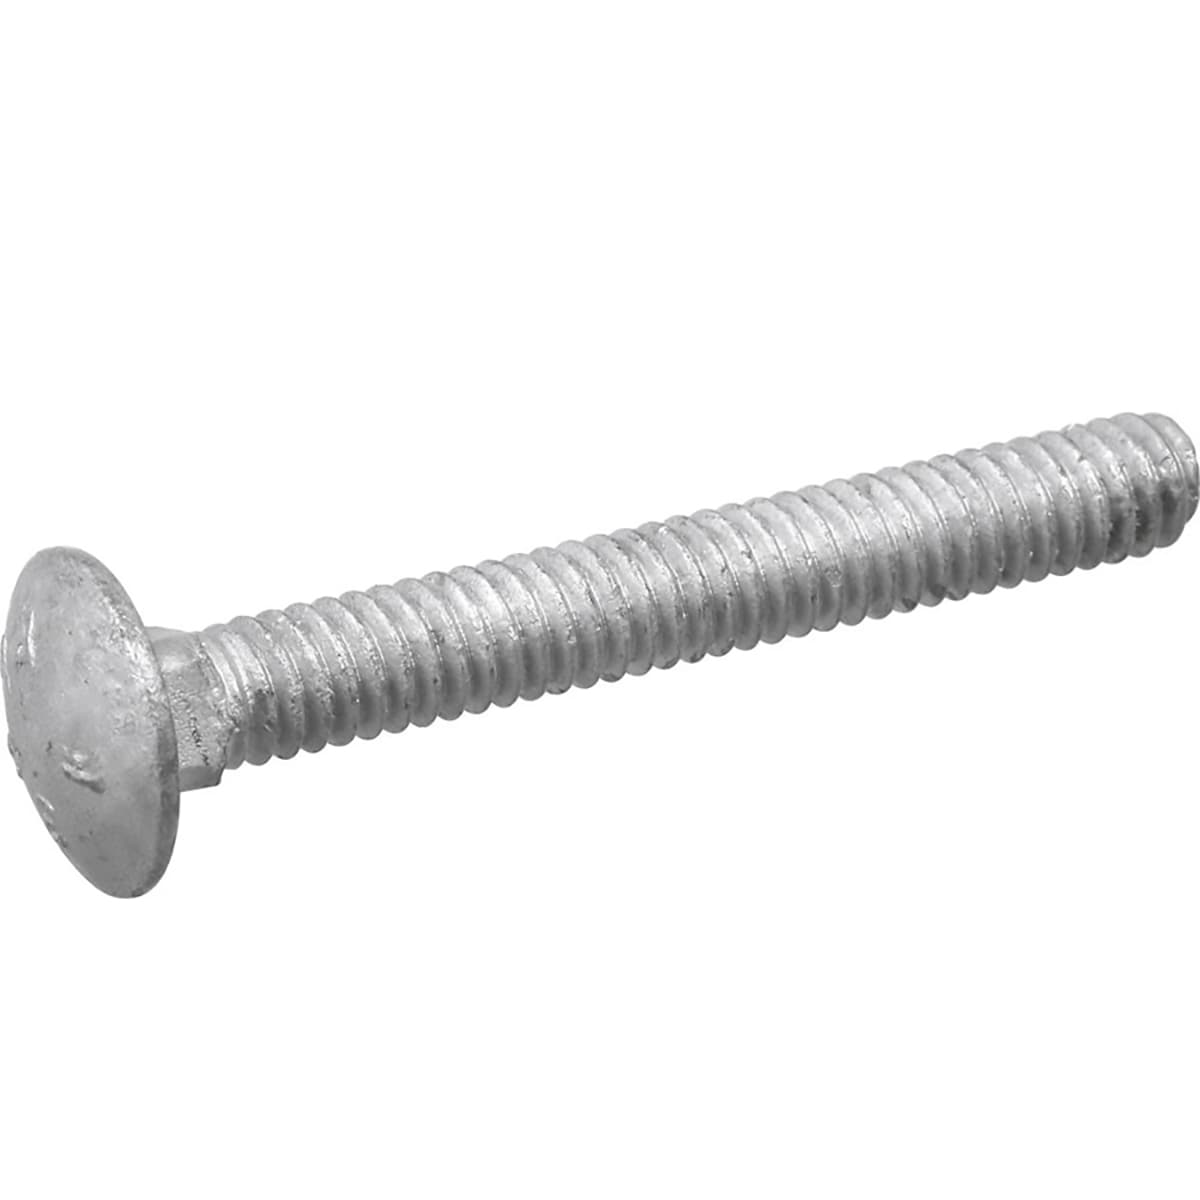 3/8-16 x 14" Carriage Bolts and Nuts Hot Dip Galvanized Quantity 25 